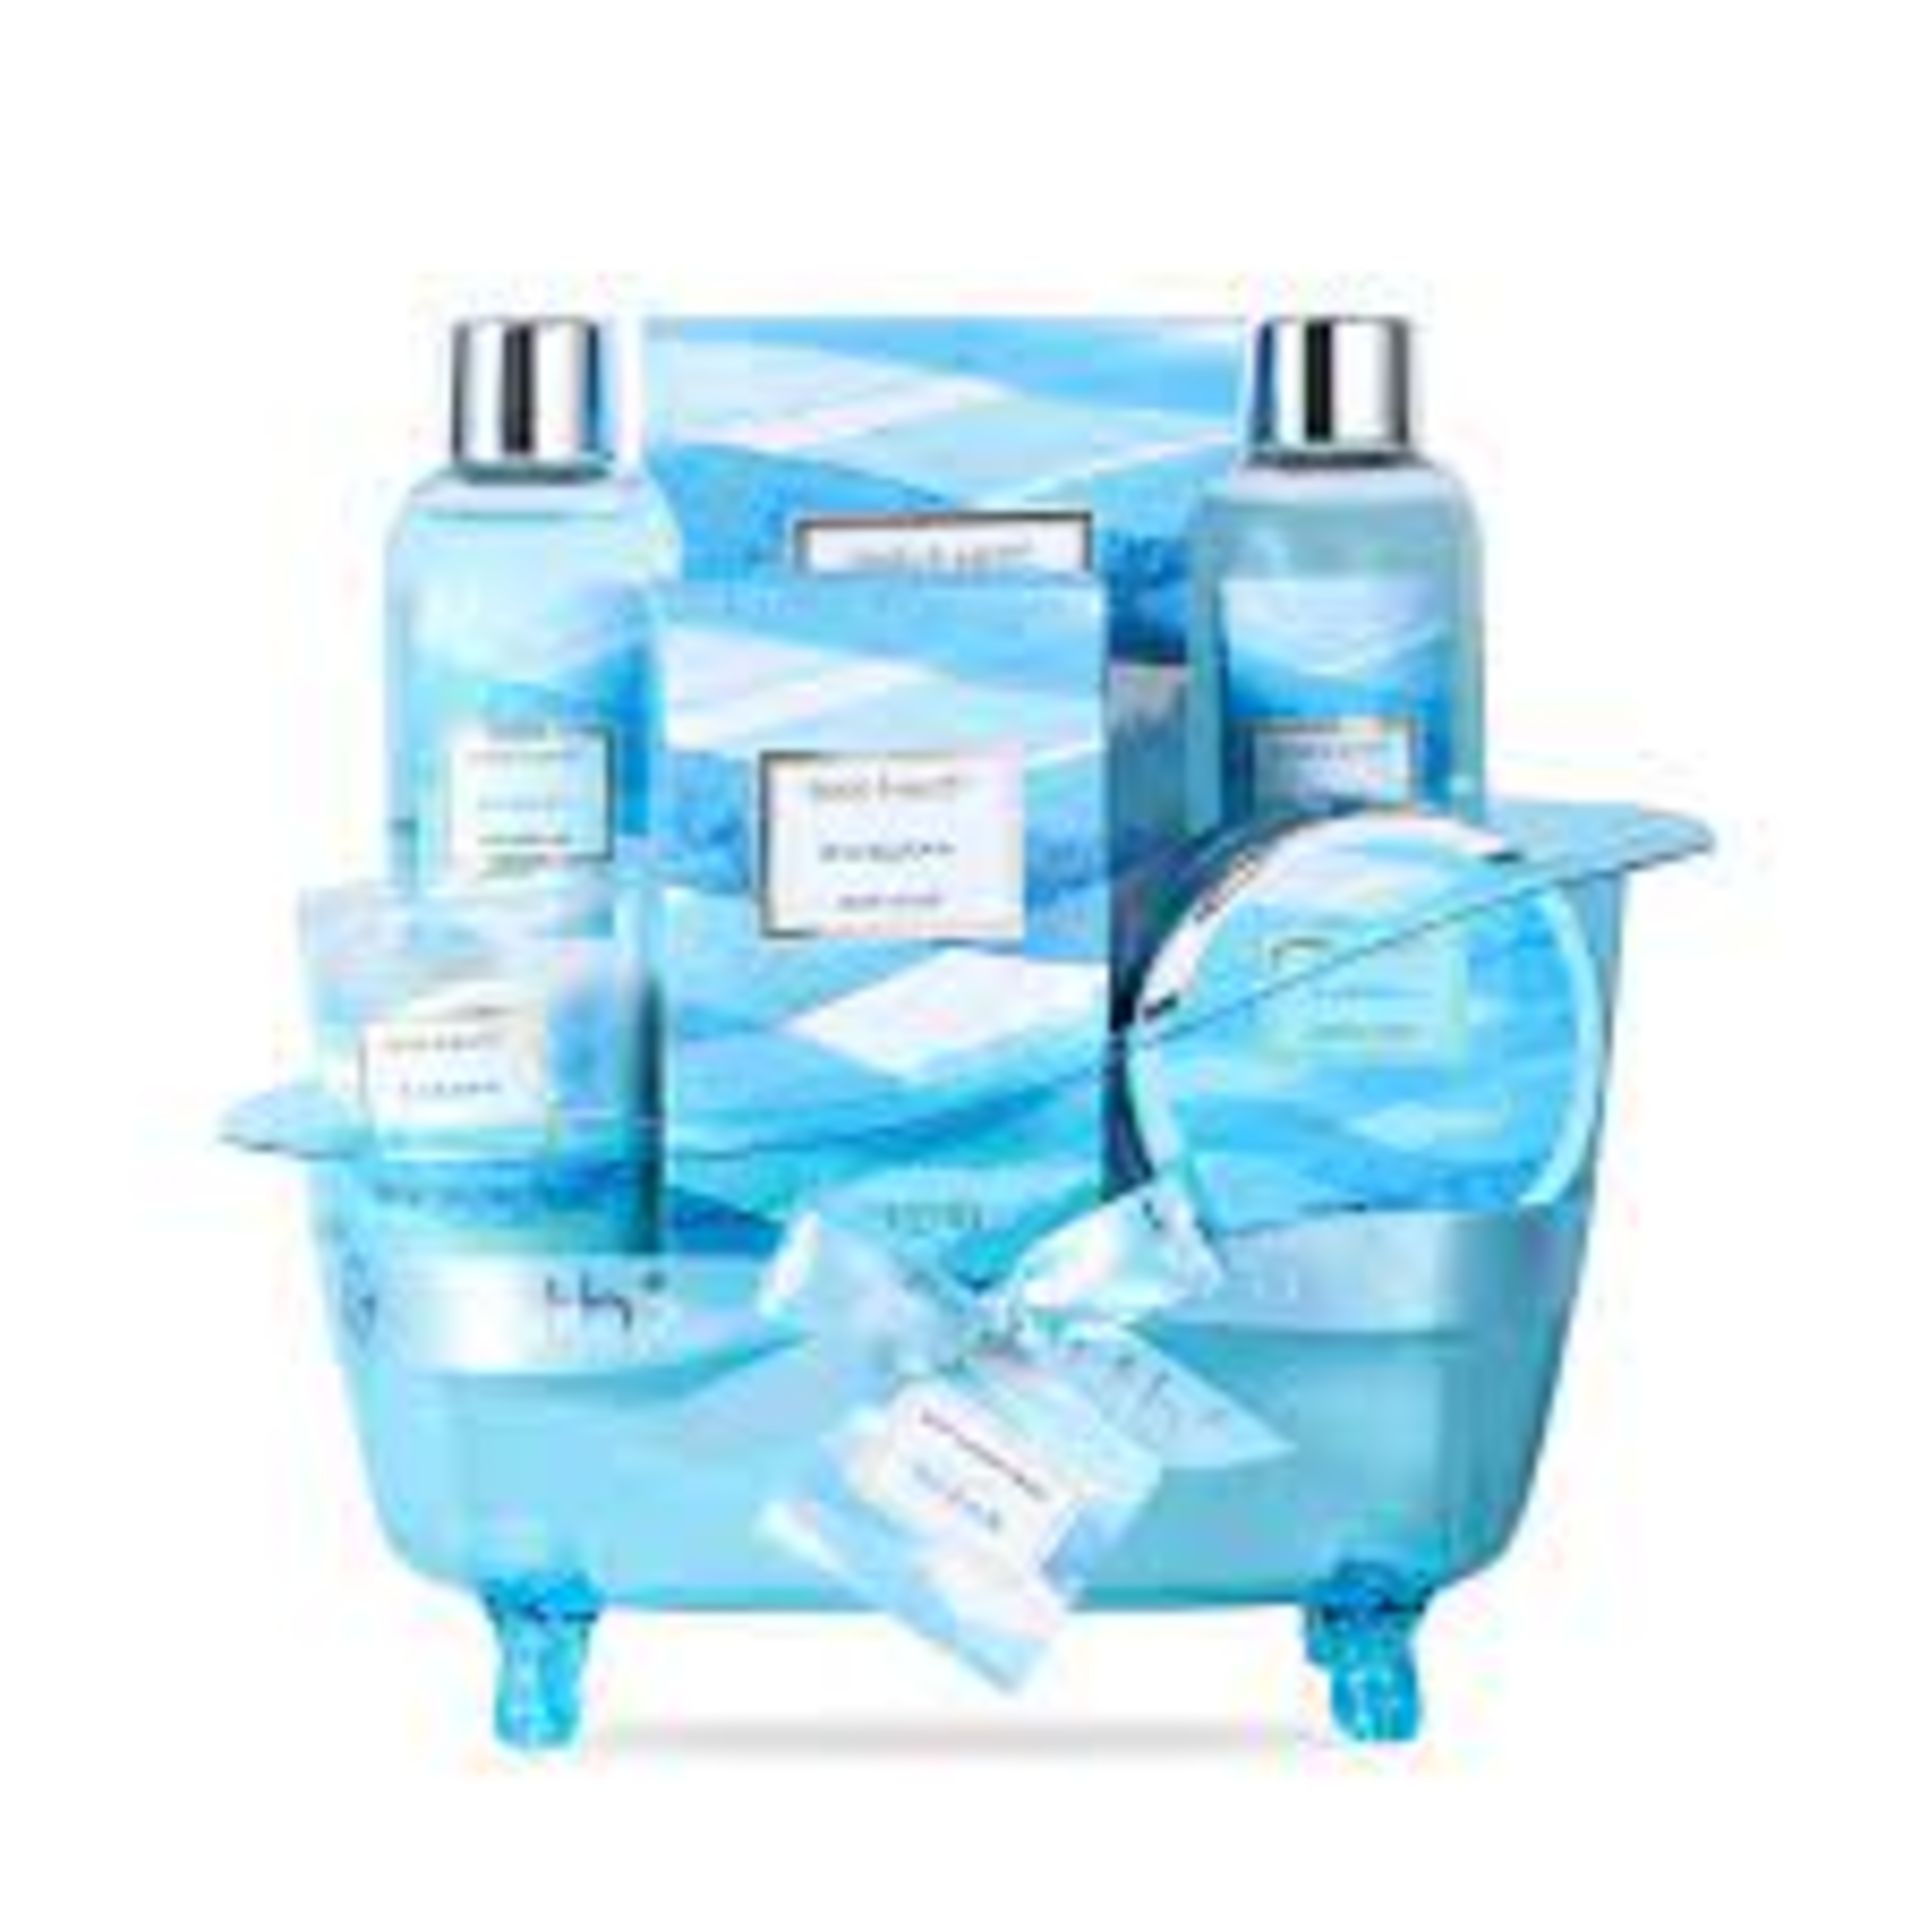 PALLET TO CONTAIN 48 x NEW PACKAGED Body & Earth Refreshing Ocean Spa Bathtub Set. (BEC-4-NEW)